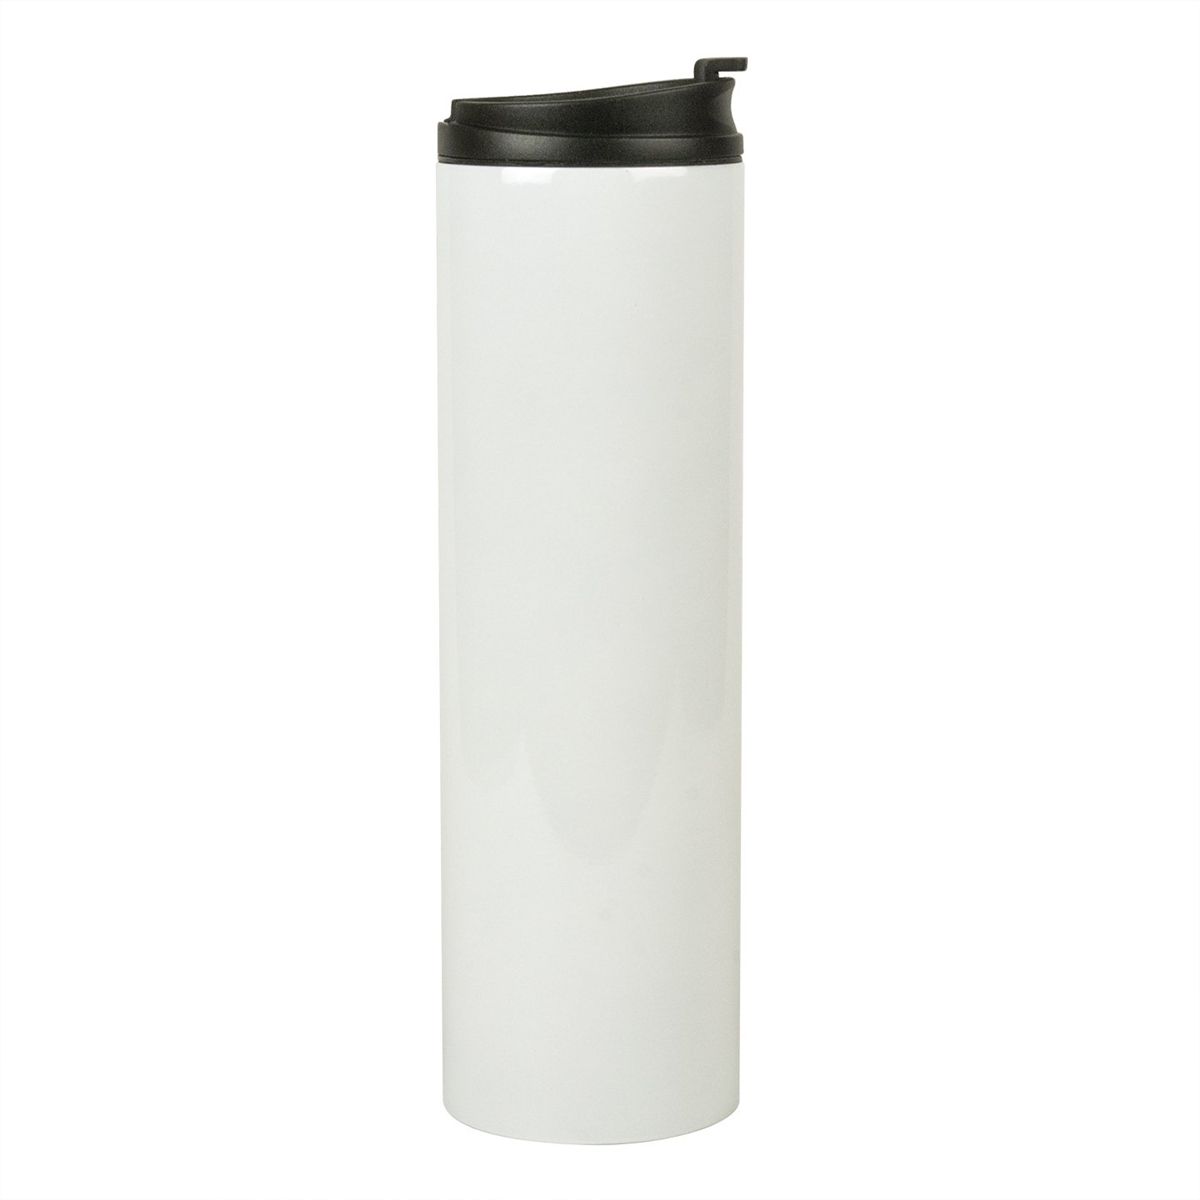 20 oz. Orca Stainless Steel Skinny Tumbler with Lid and Straw